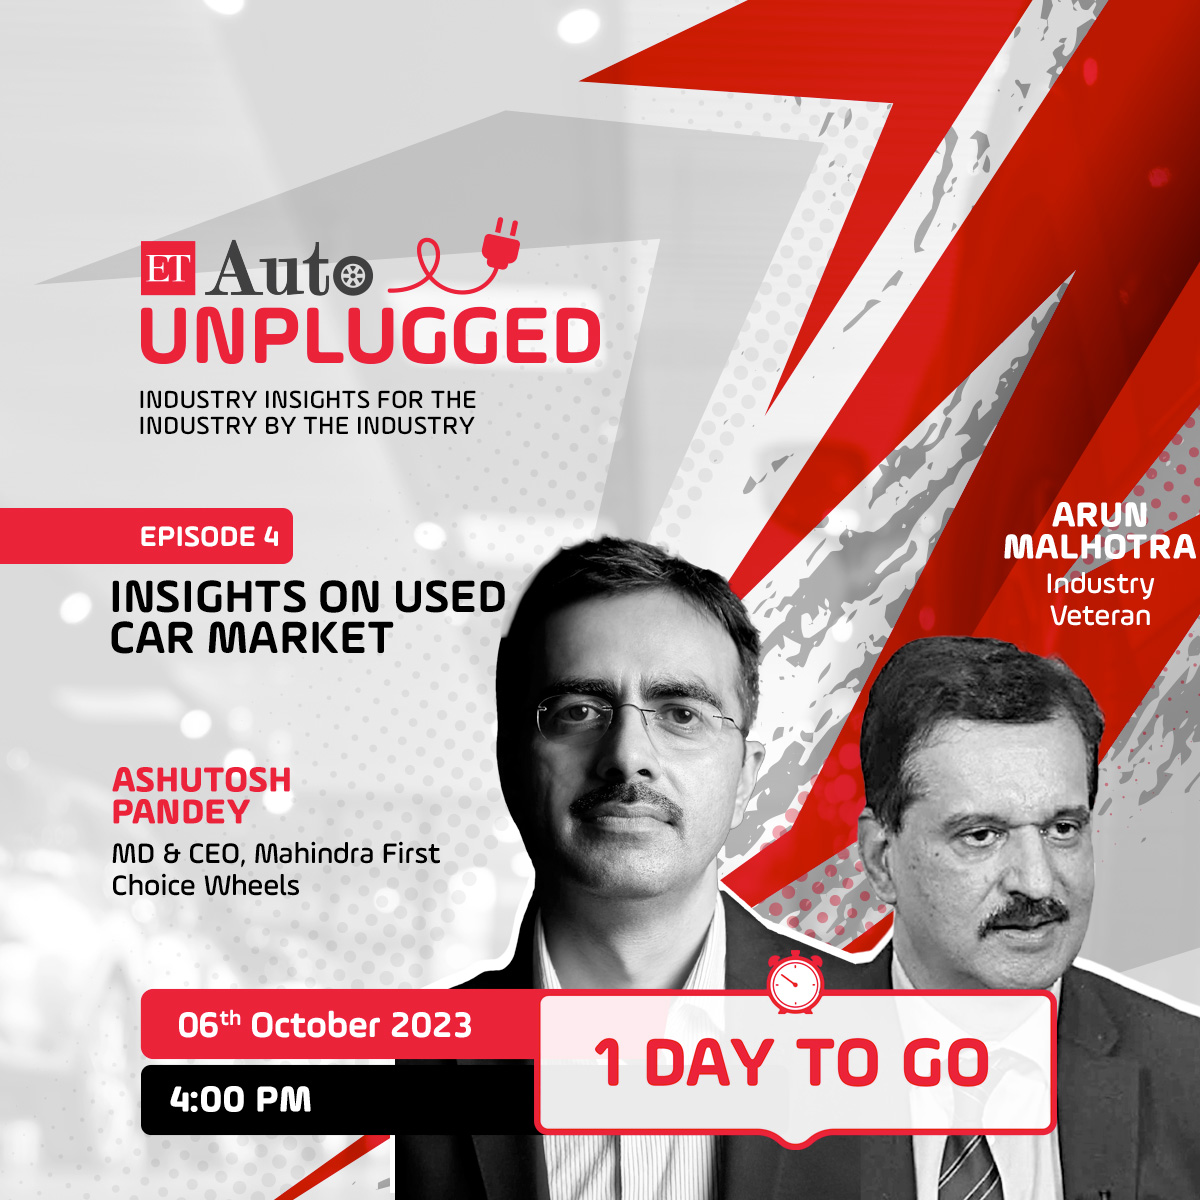 1 DAY TO GO!! #ETAutoUnplugged EP 4 releases tomorrow. 'Insights on Used Car Market' with @ashutosh9315, MD & CEO, Mahindra First Choice Wheels Ltd When: October 6, 2023 (Friday) Time: 4.00 PM Where: auto.economictimes.indiatimes.com/unplugged @ArunMalhotra_07 #ETAutoUnplugged #ETAuto